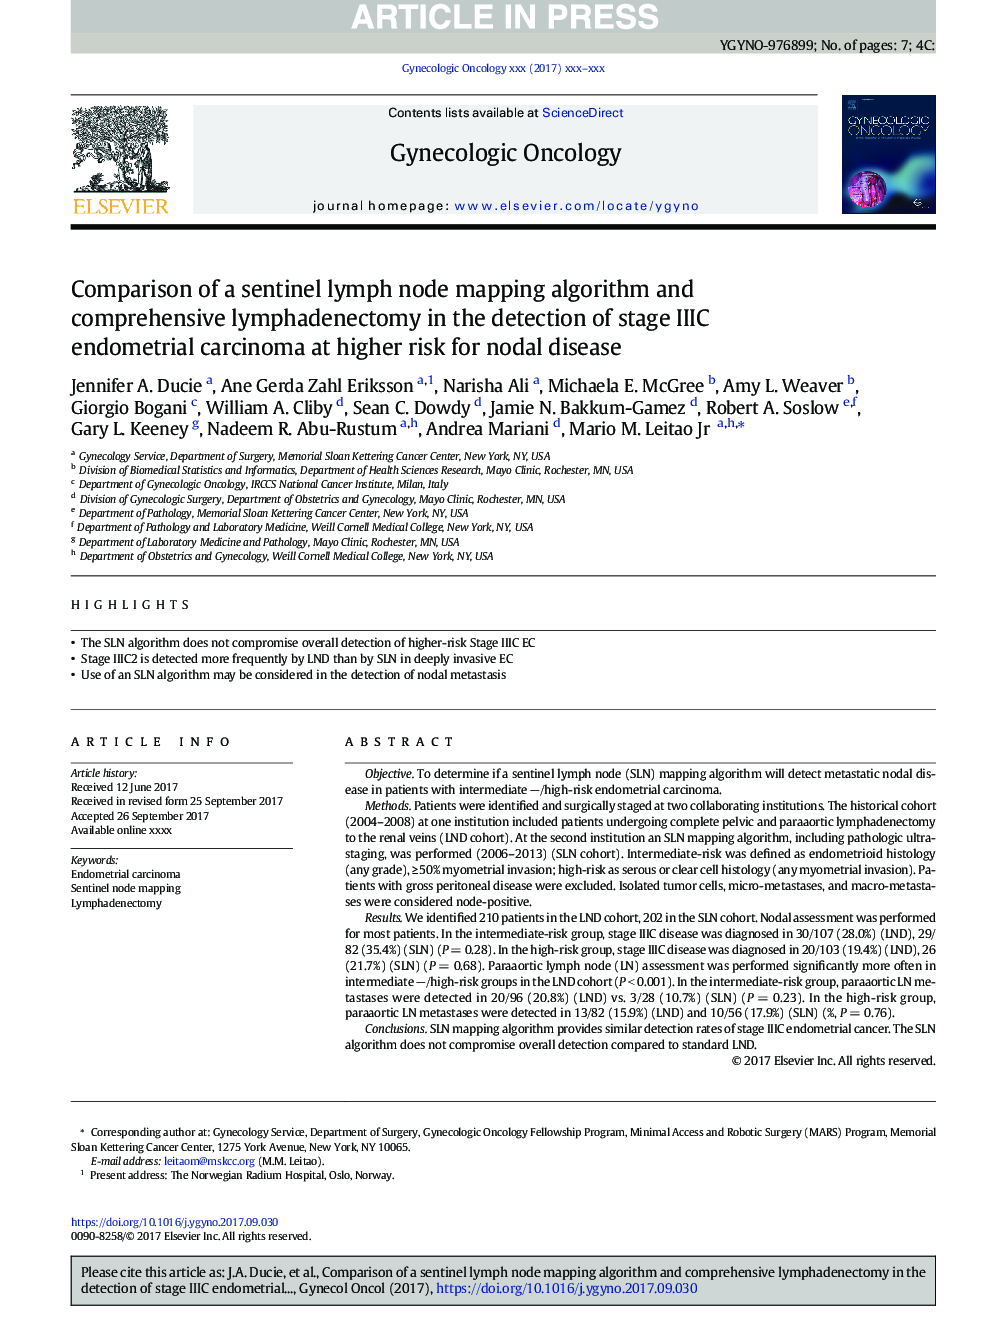 Comparison of a sentinel lymph node mapping algorithm and comprehensive lymphadenectomy in the detection of stage IIIC endometrial carcinoma at higher risk for nodal disease